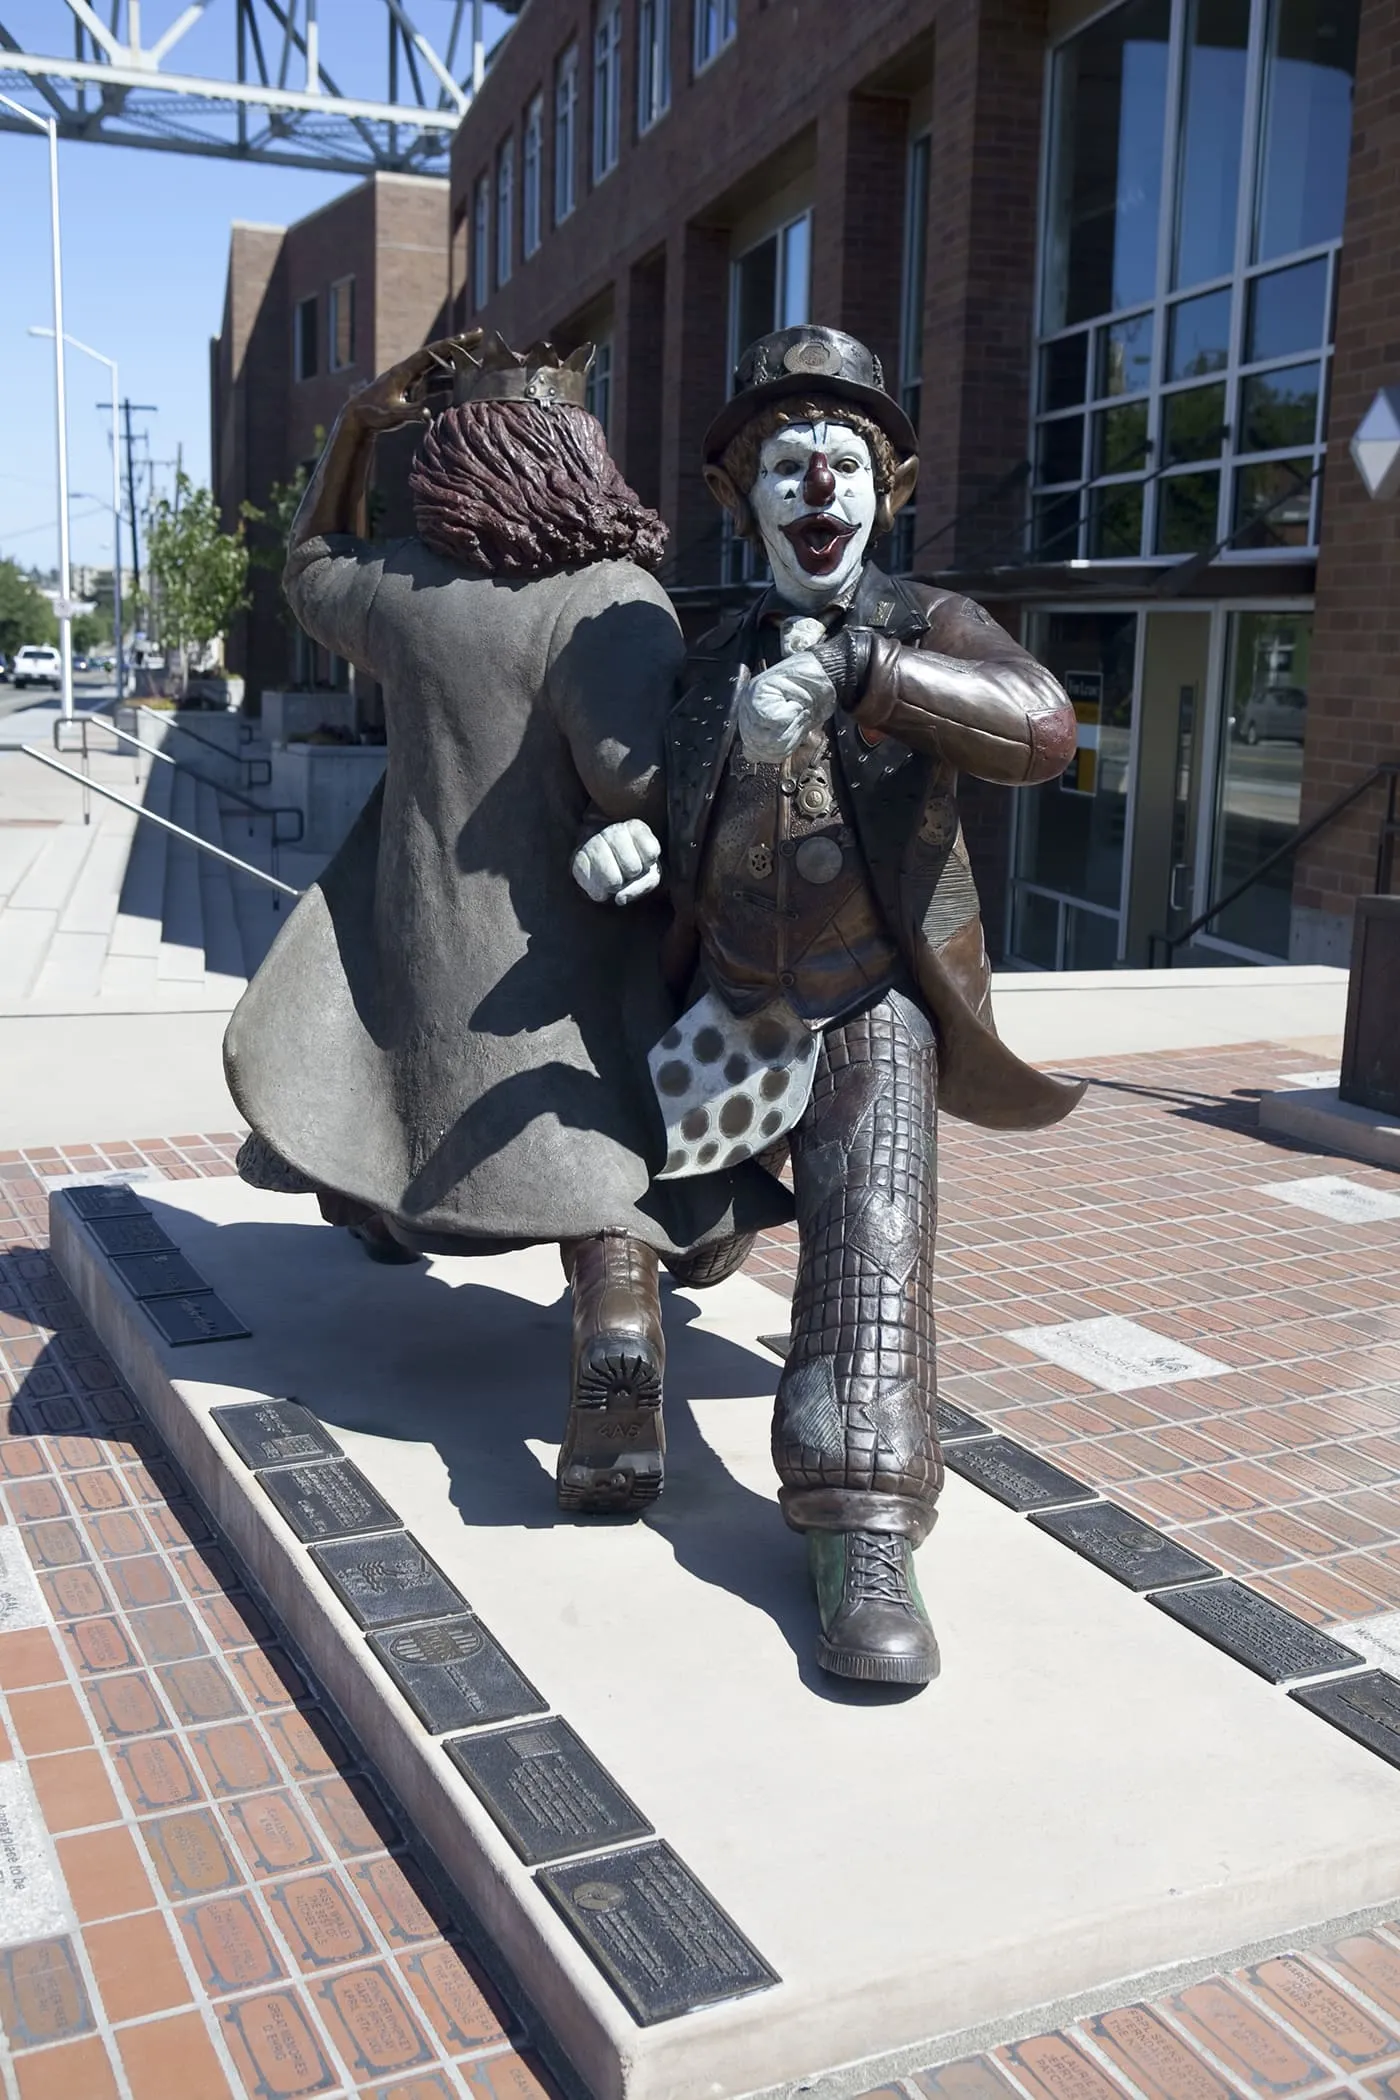 Late for the Interurban, a statue of J.P. Patches and his girlfriend Gertrude in the Fremont area of Seattle, Washington.